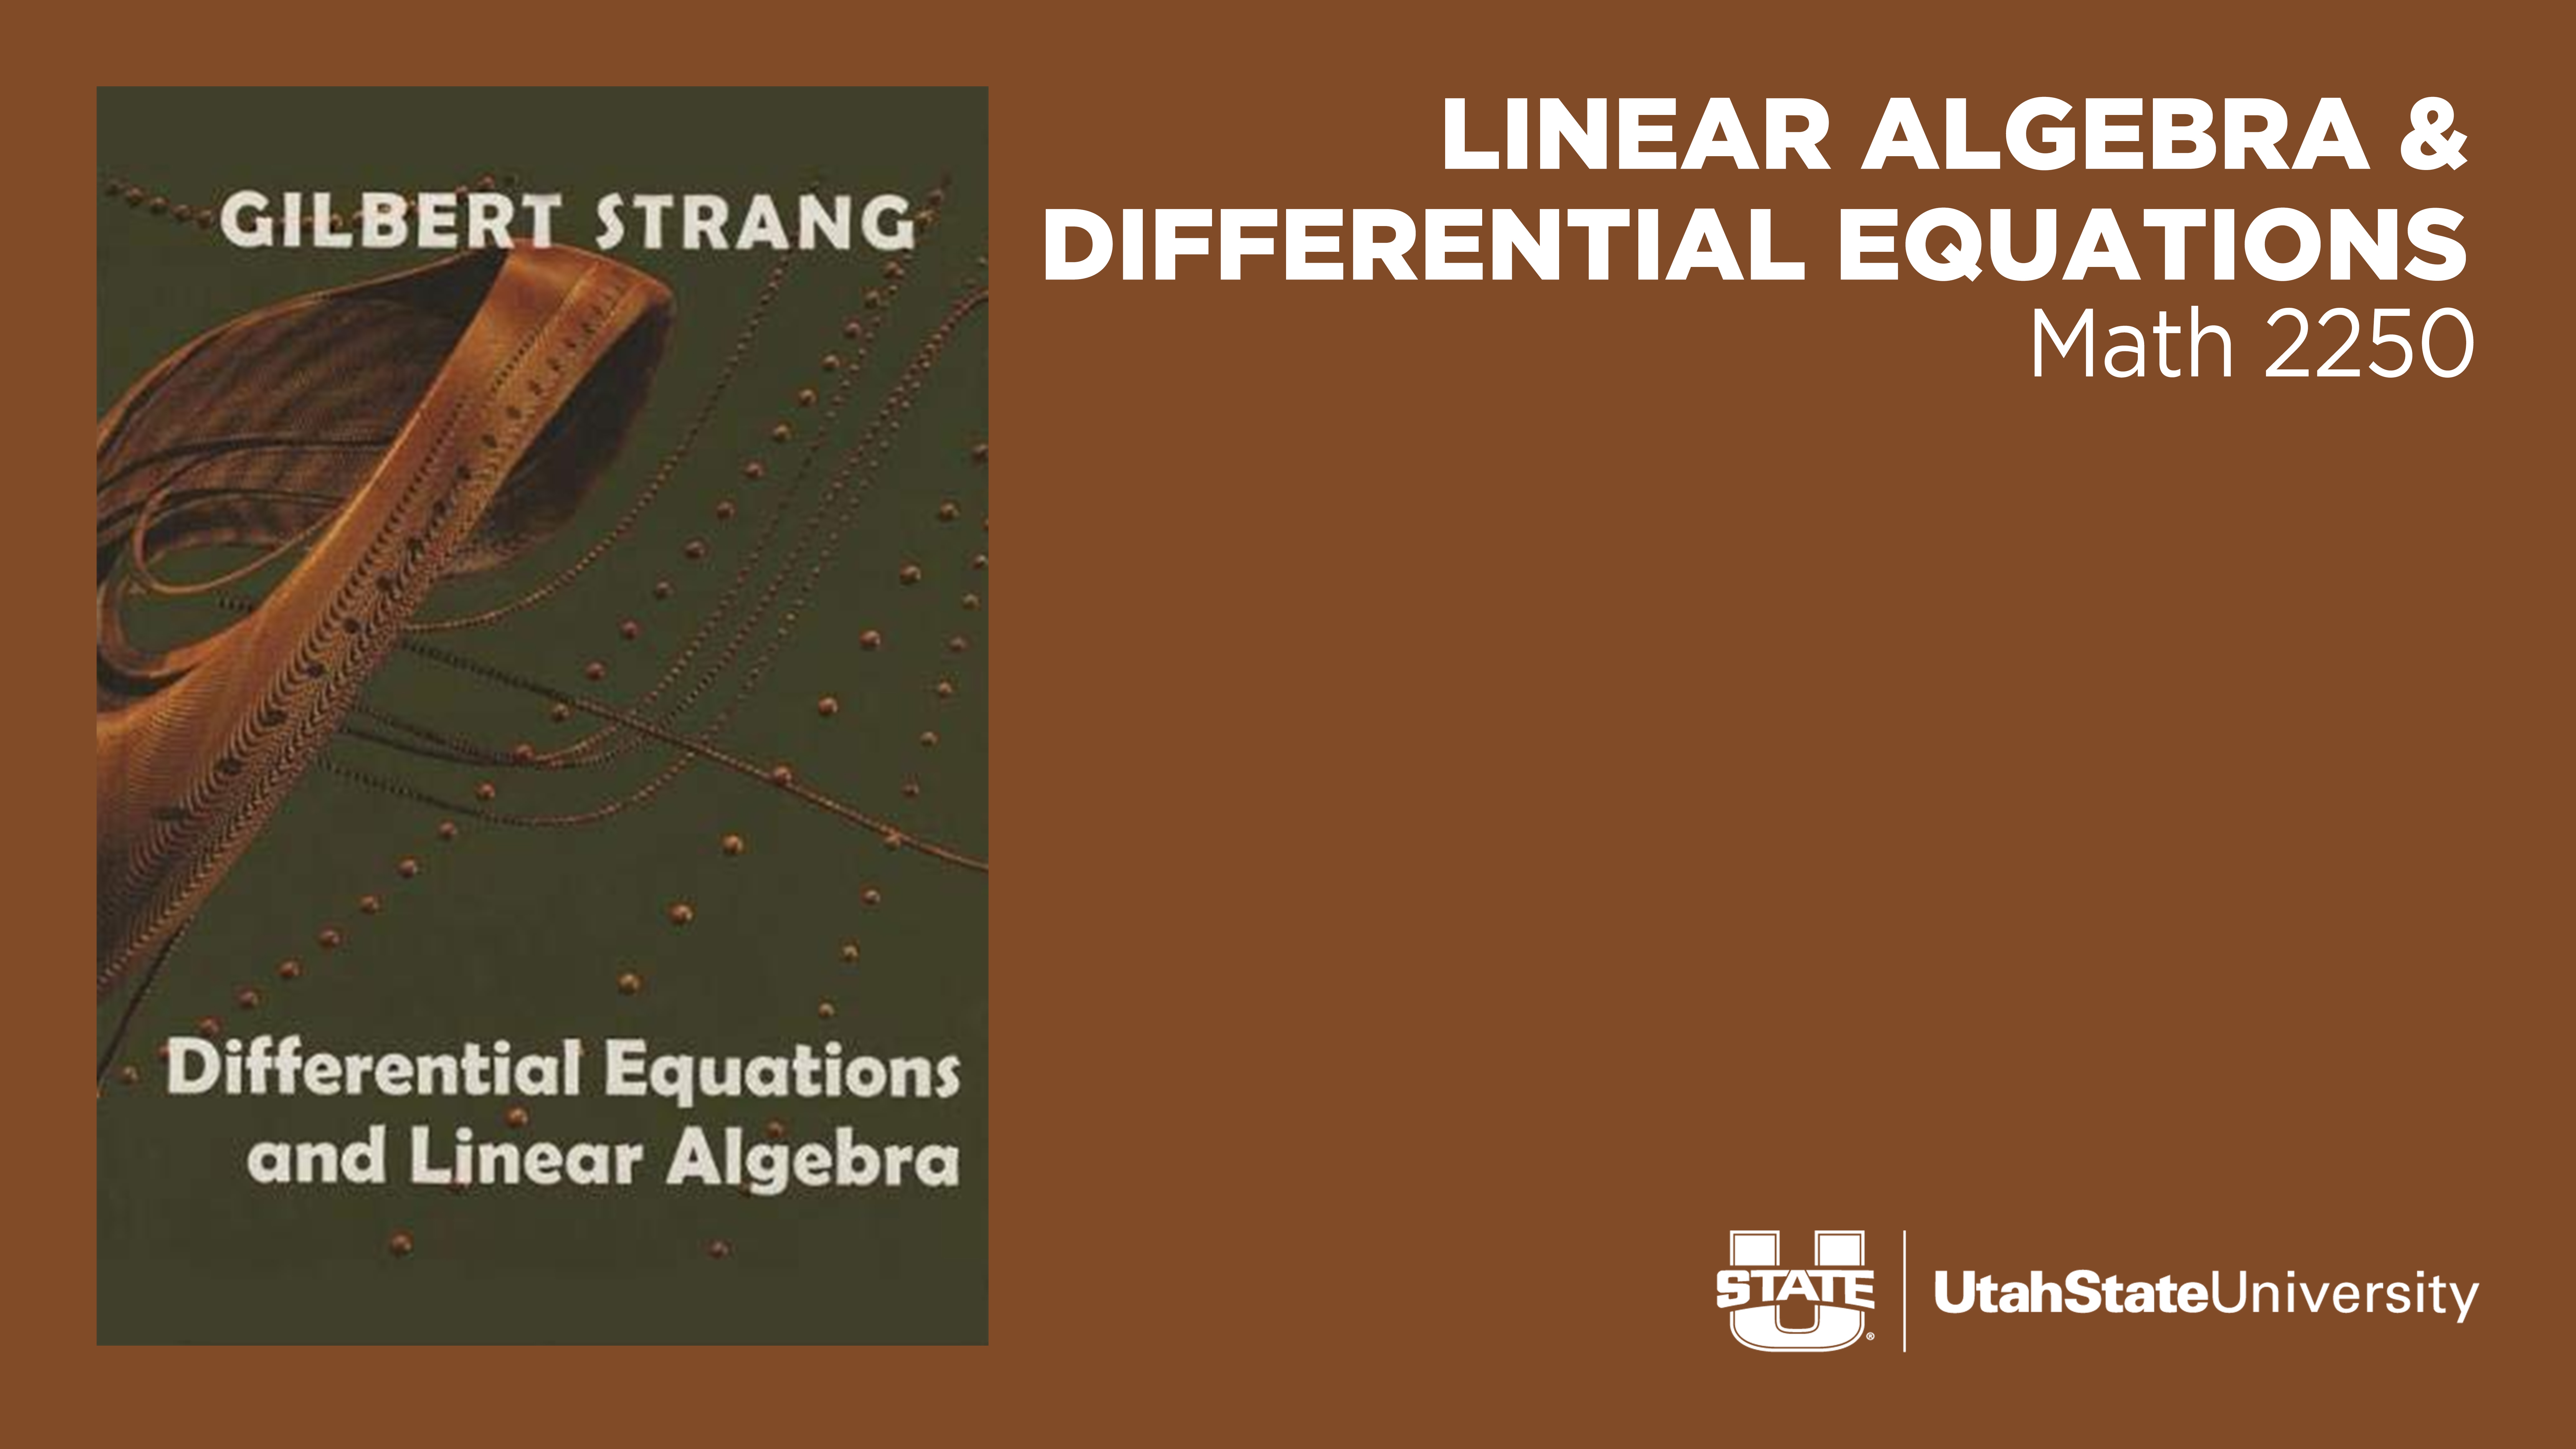 Linear Algebra & Differential Equations